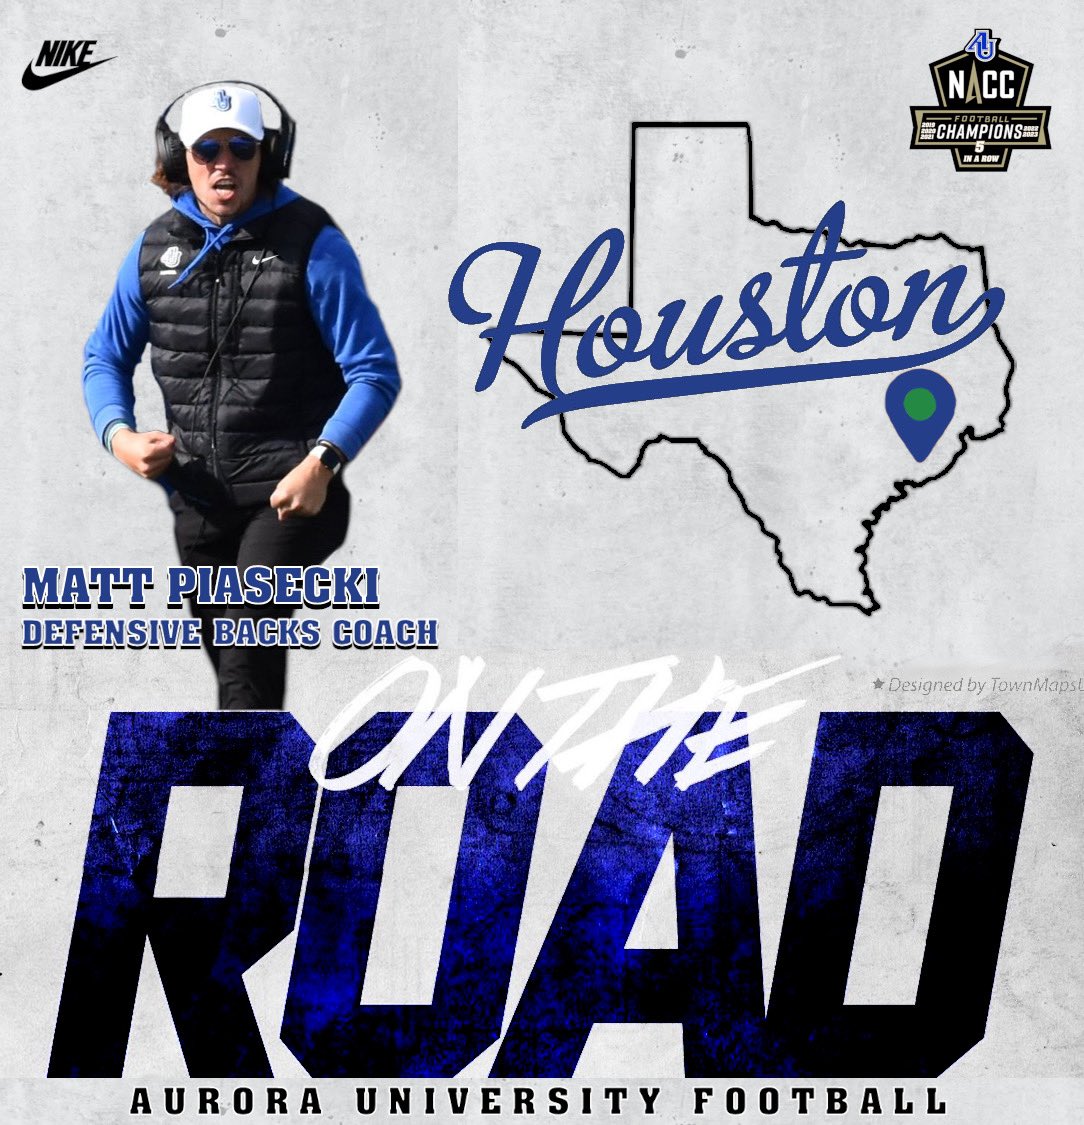 Wheels down in Texas! Houston Ballers be on the lookout for @CoachPiasecki tomorrow @SRfbshowcase! Looking to build towards our 6th straight @NACC_sports Championship! #weareoneAU